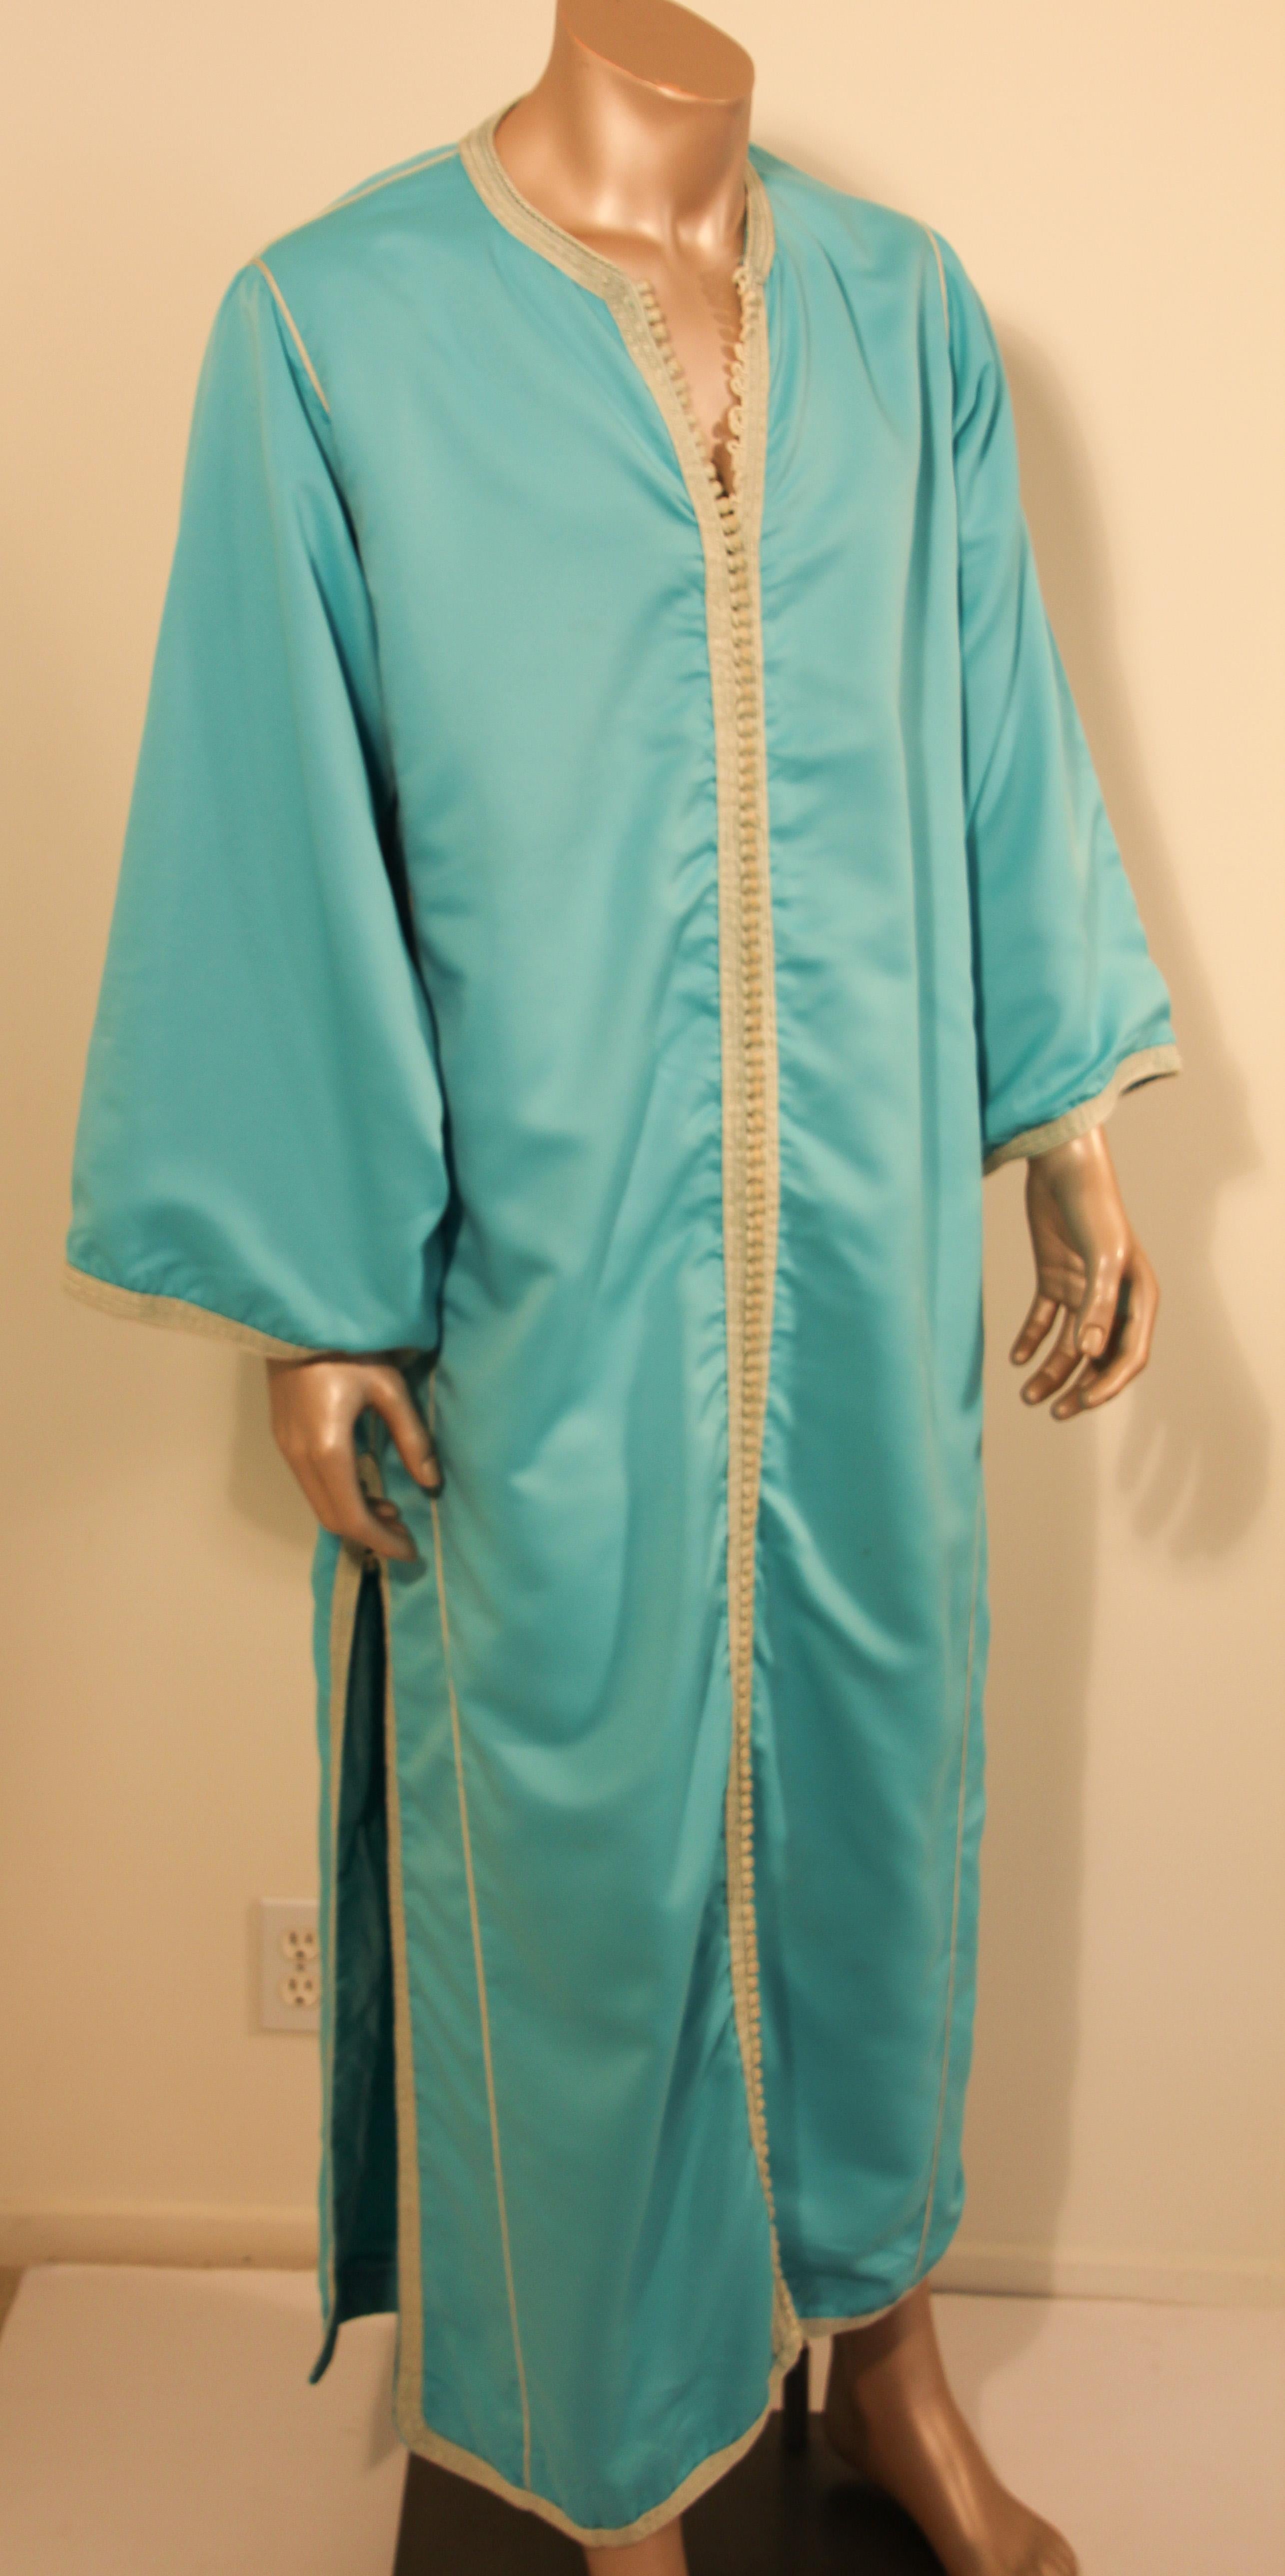 Handmade long maxi dress caftan from North Africa, Morocco.
Vintage 1940s caftan robe.
Maxi dress caftan with running down the center round braided buttons from the neckline to the hemline.
Fully front thread buttoning with hand knotted looped